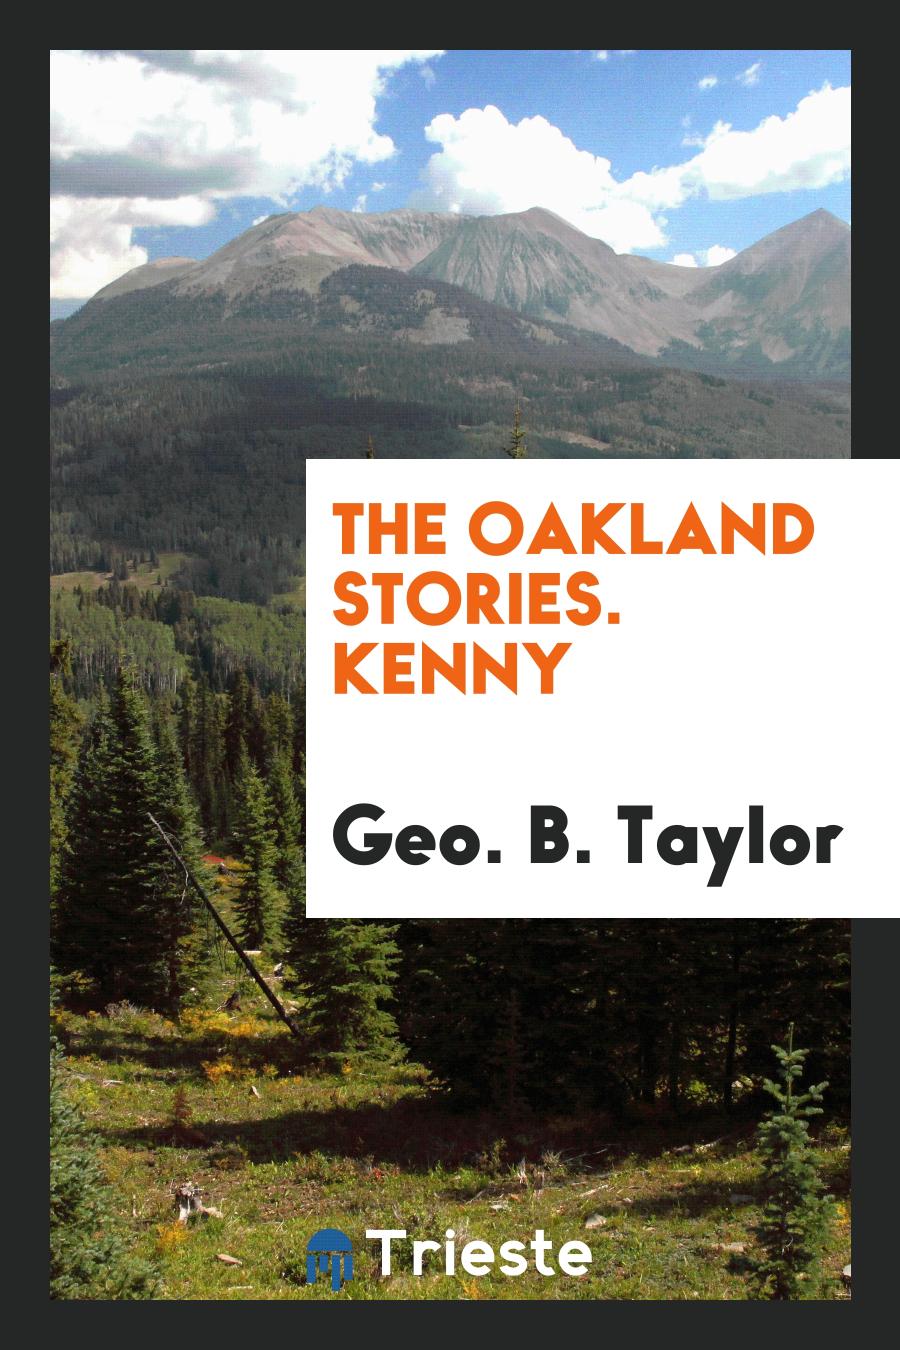 The Oakland stories. Kenny